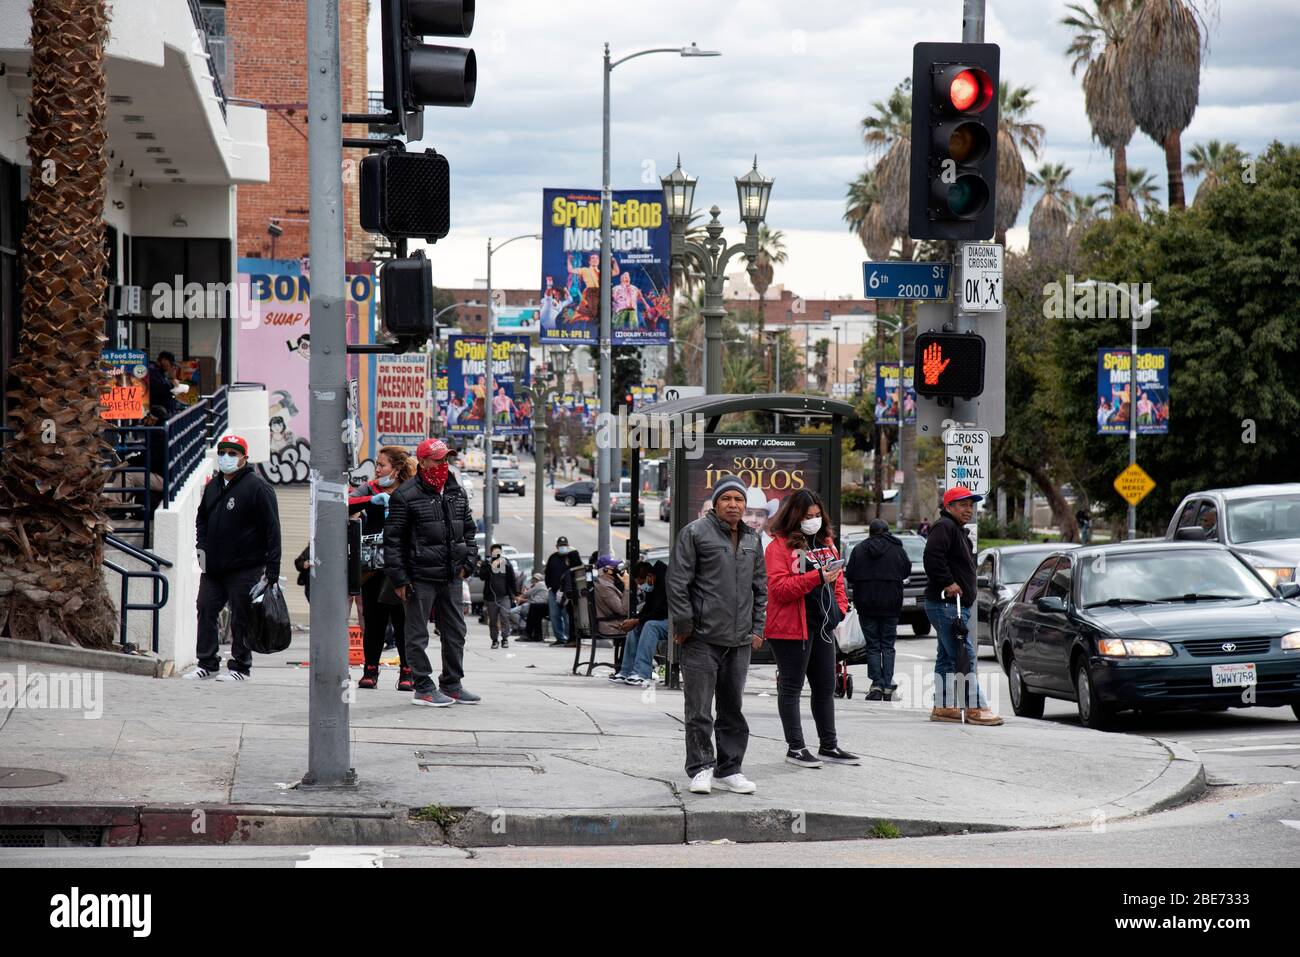 Los Angeles, CA/USA - April 9, 2020: Poor and indigent people crowd together on the streets of the Westlake neighborhood during coronavirus quarantine Stock Photo